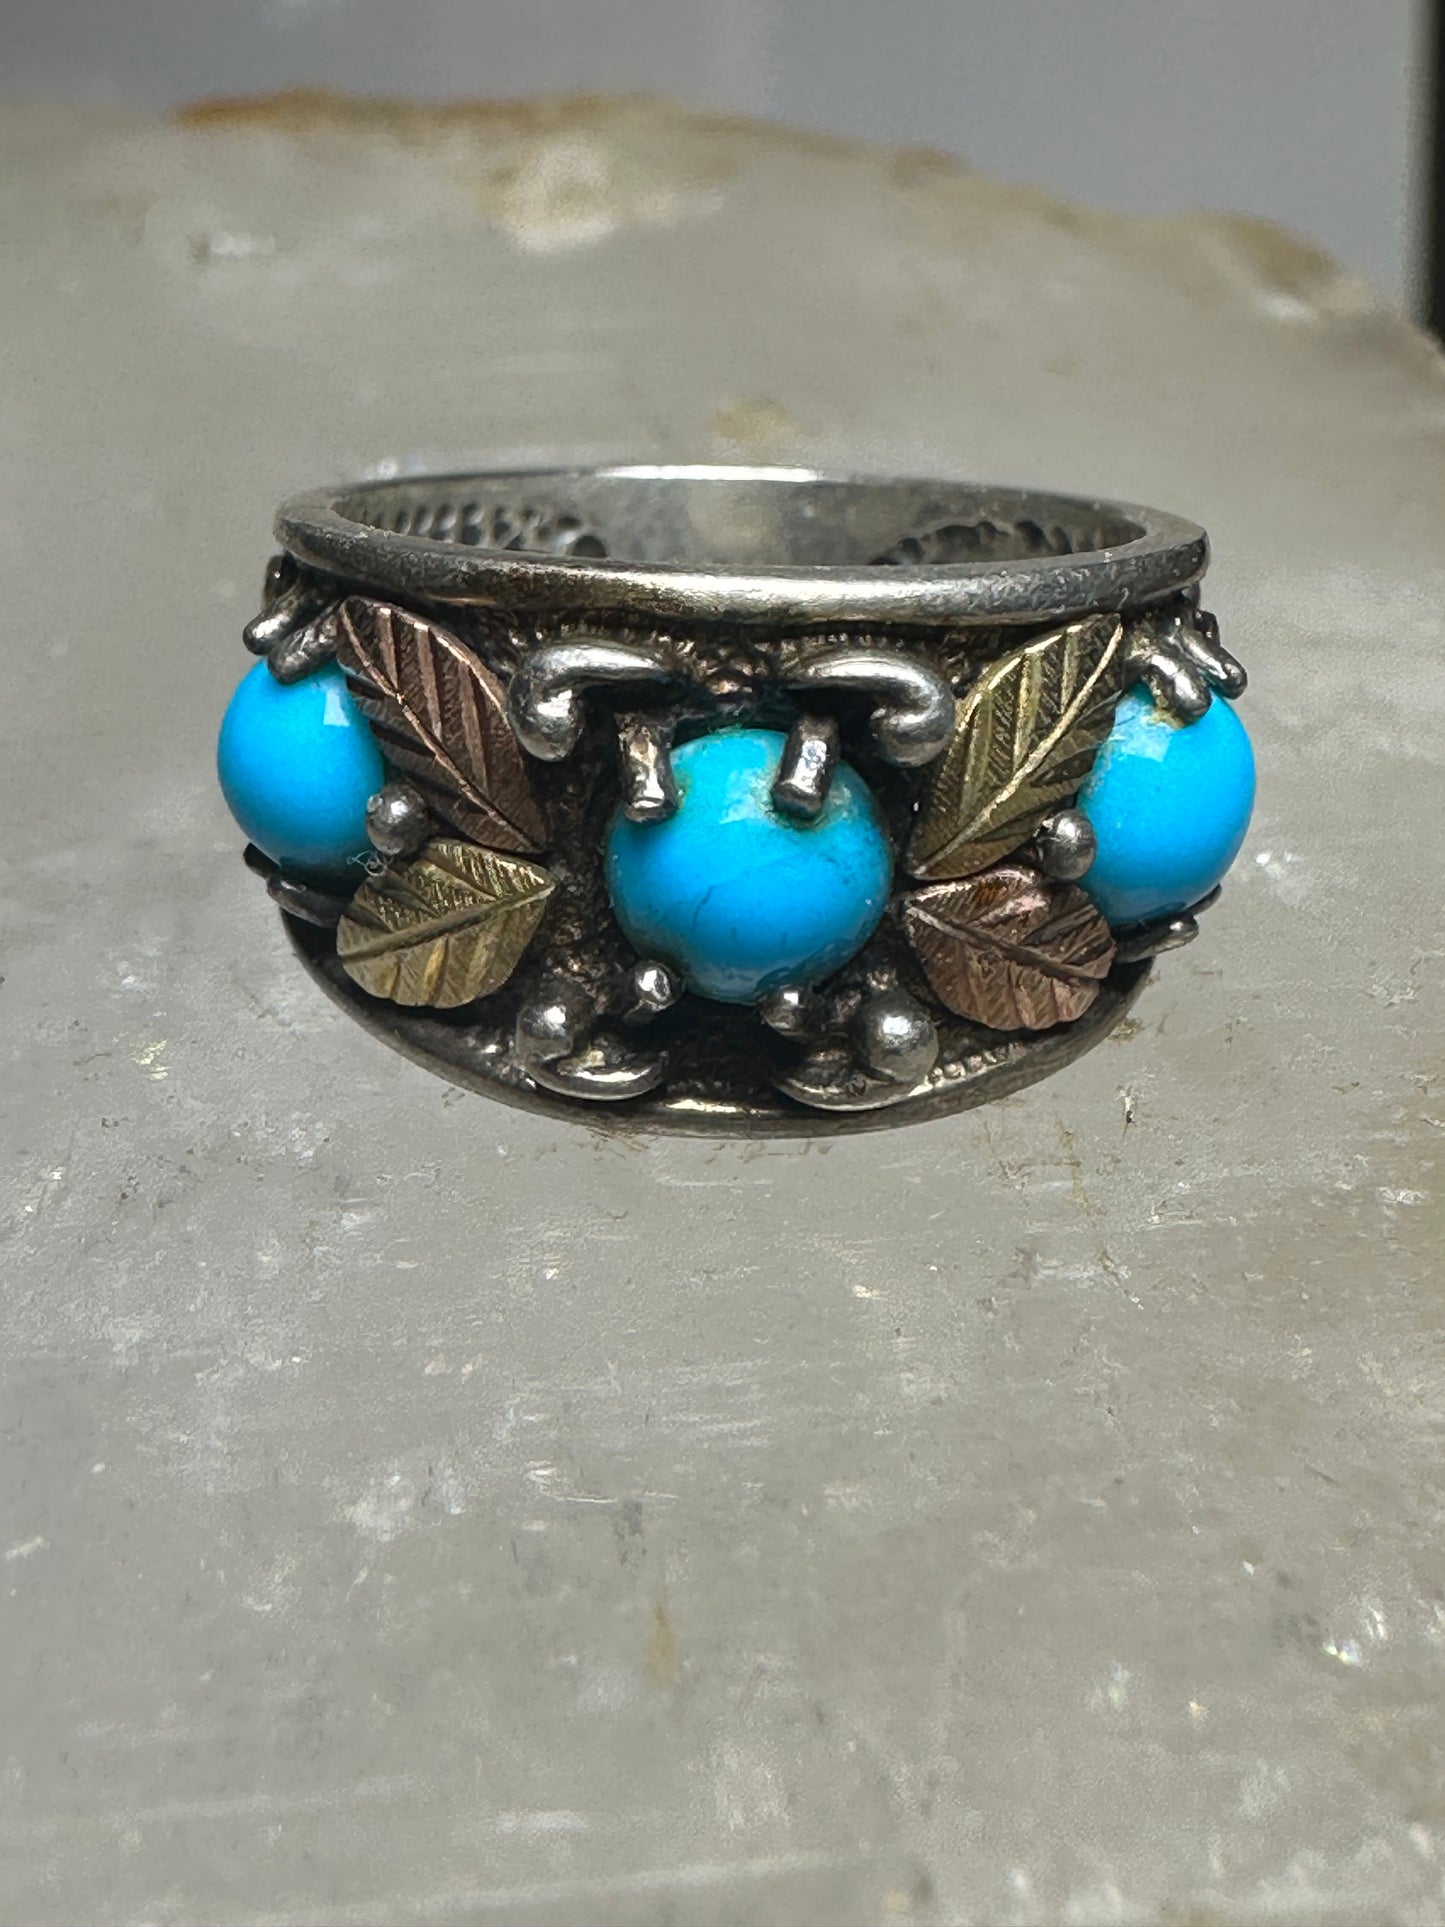 Black Hills Gold ring turquoise band size  4.75 sterling silver women